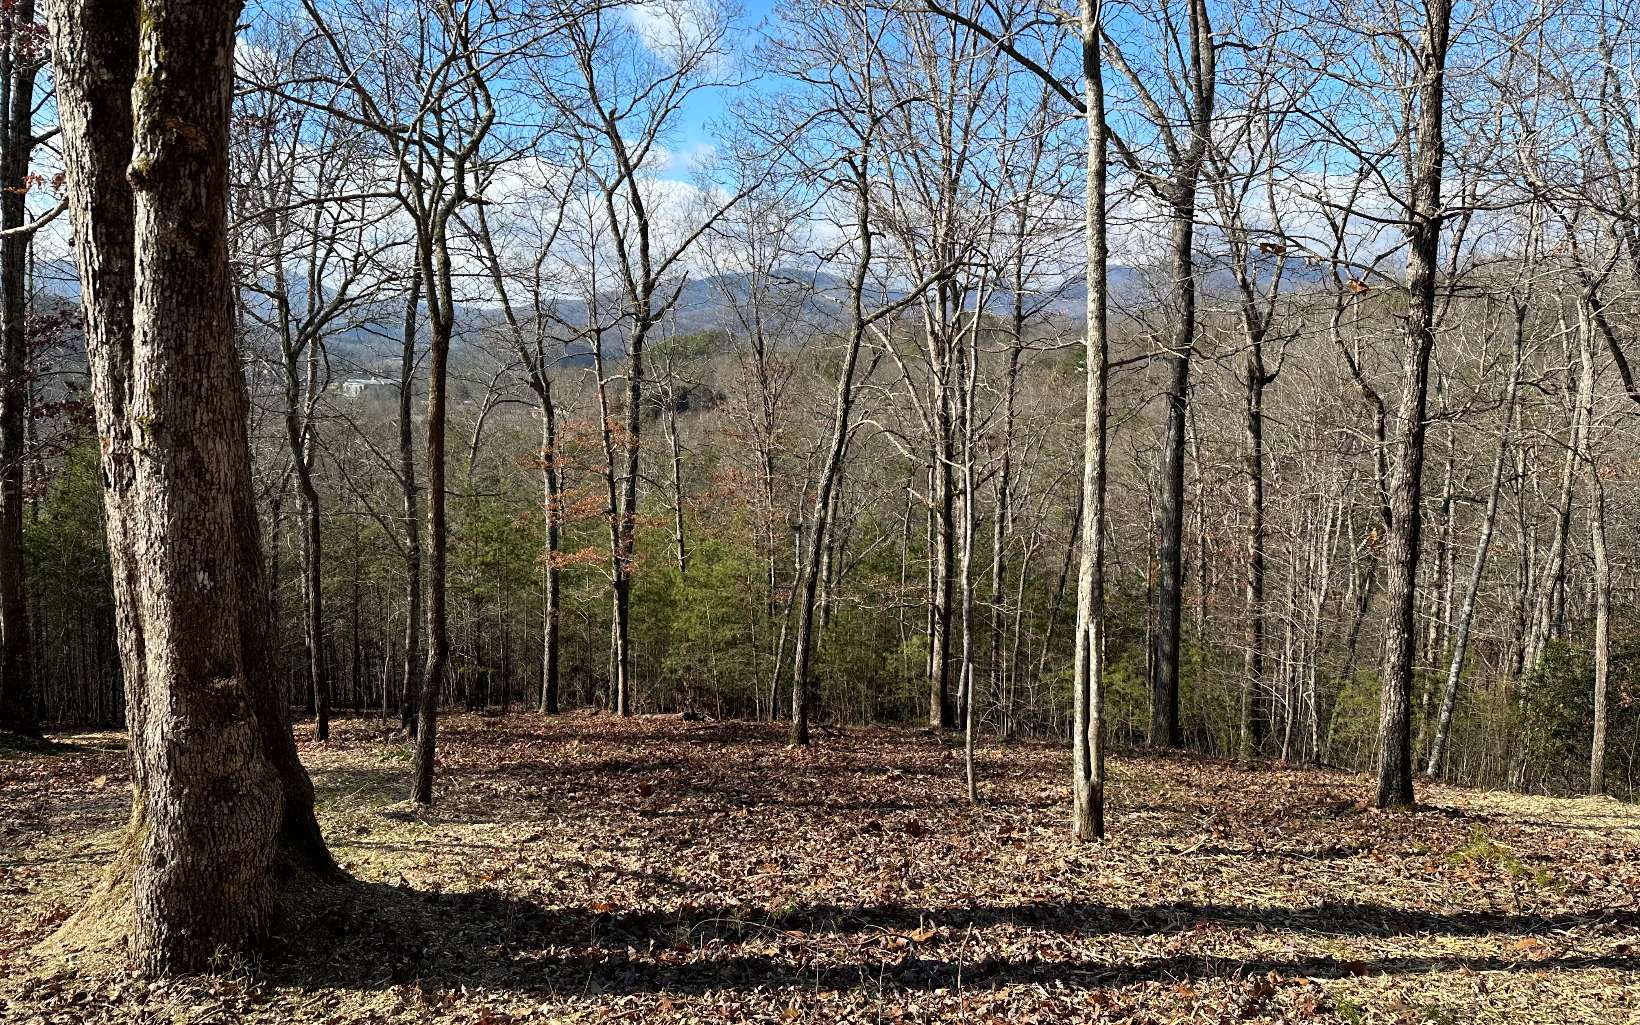 This is ONE OF THE BEST Subdivisions in Young Harris, GA! Gentle Lot, Easy to Build on, Good Access & Great Views! Very Close to Brasstown Valley Resort & Young Harris College. Come and take a look at this Great Lot Located in a Beautiful Neighborhood with Beautiful Homes!